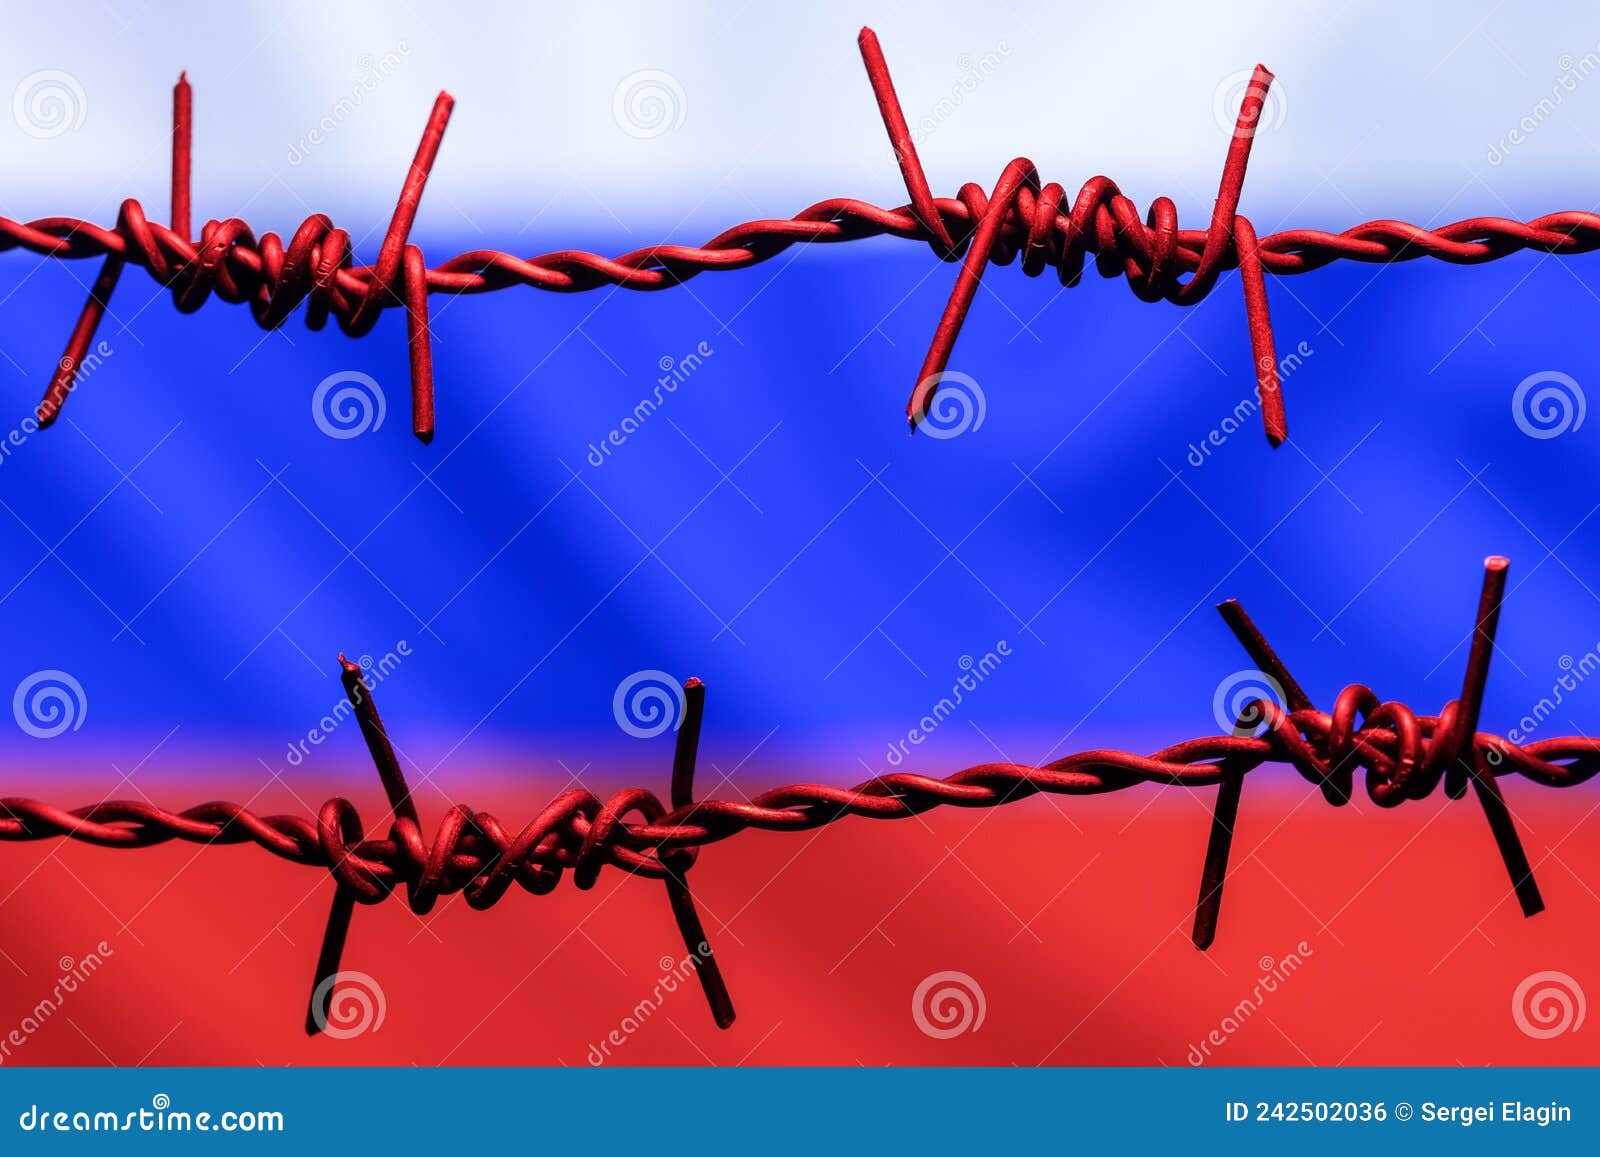 barbed wire on background of flag of russia. sanctions against russia